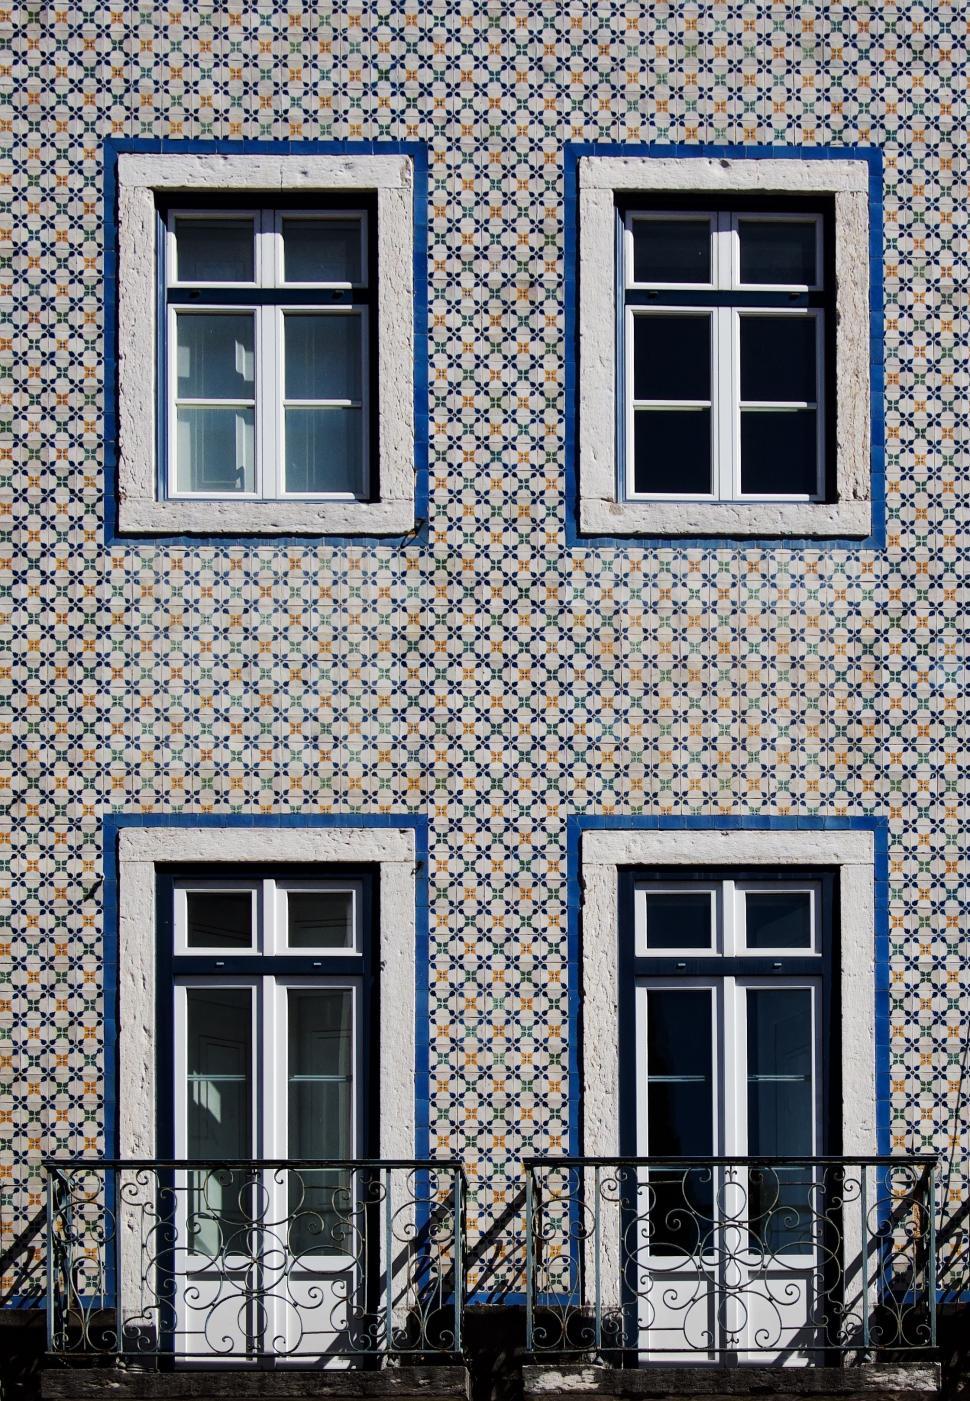 Free Image of Blue and White Building With Windows and Balconies 